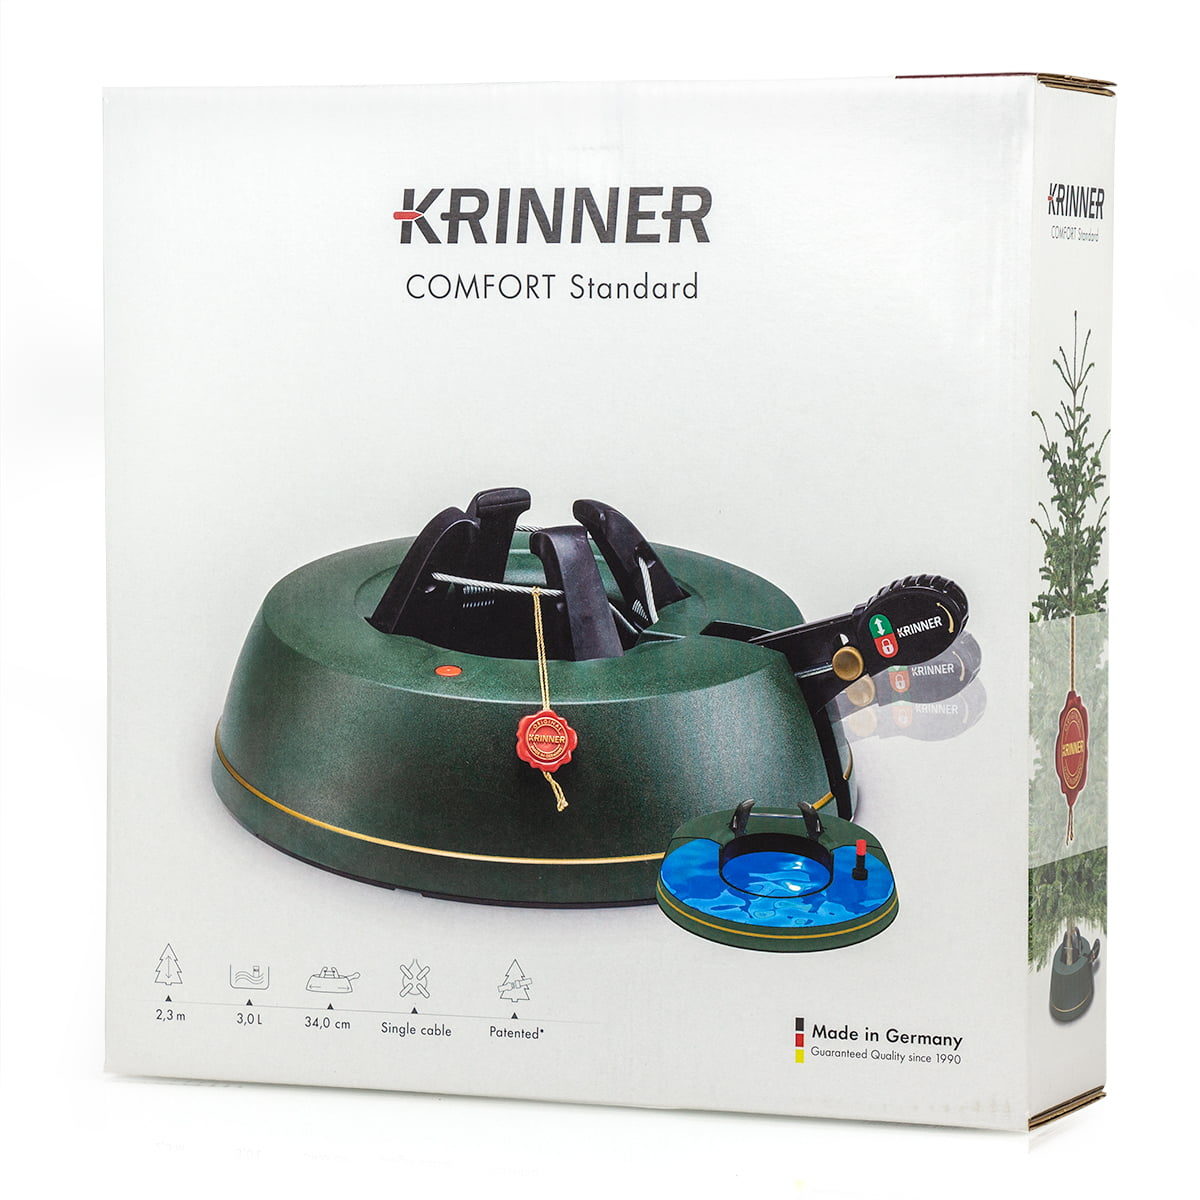 Krinner christmas tree stand in box